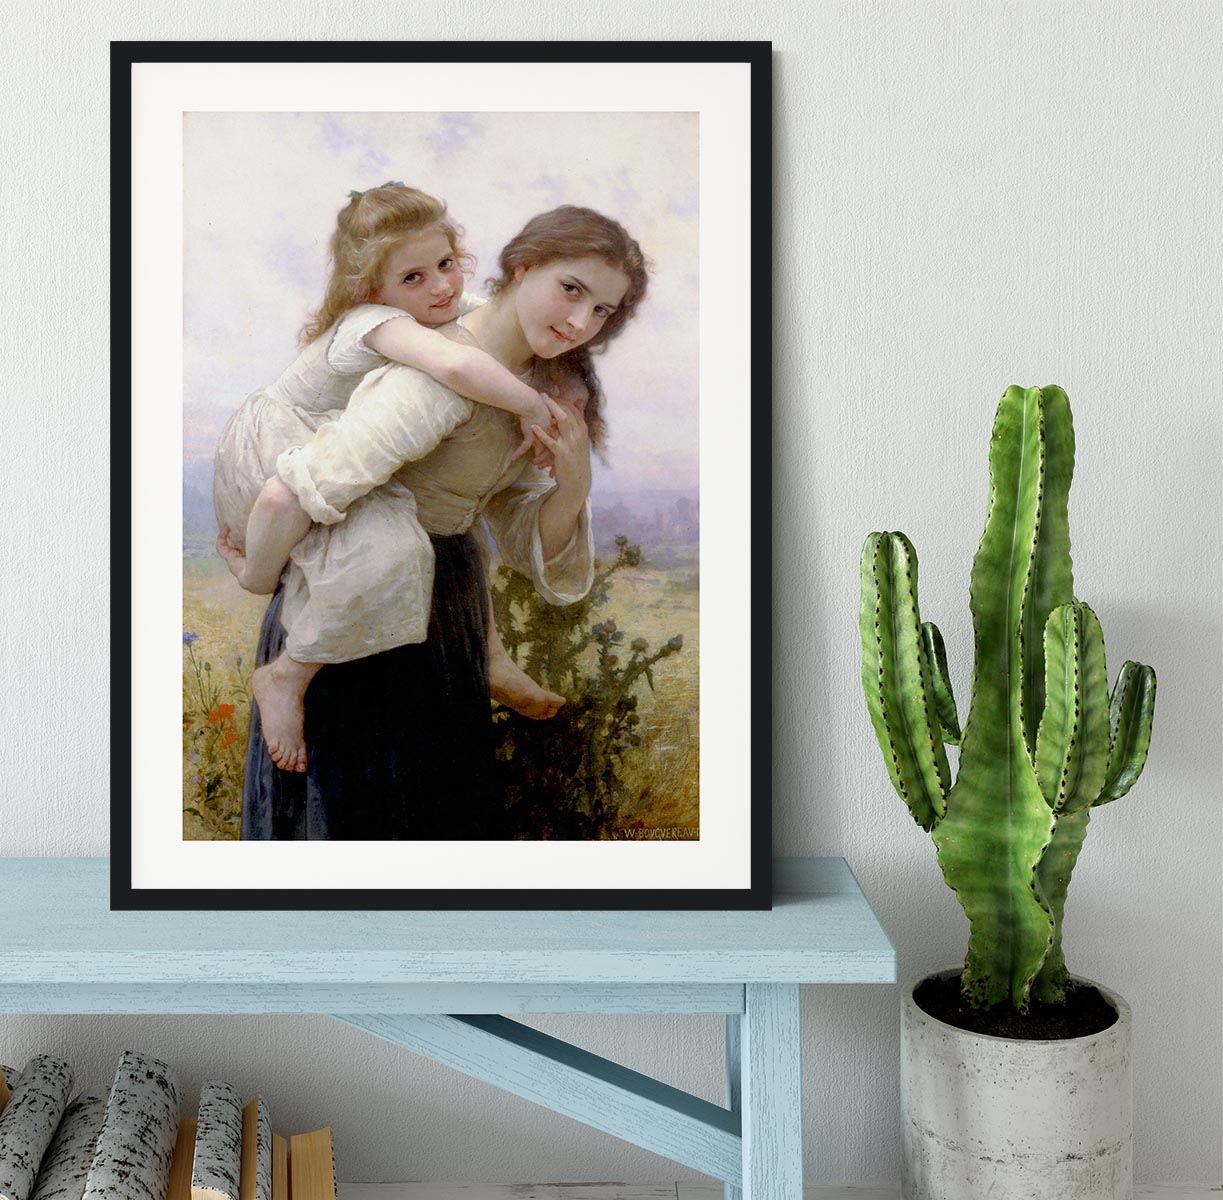 Not Too Much To Carry By Bouguereau Framed Print - Canvas Art Rocks - 1